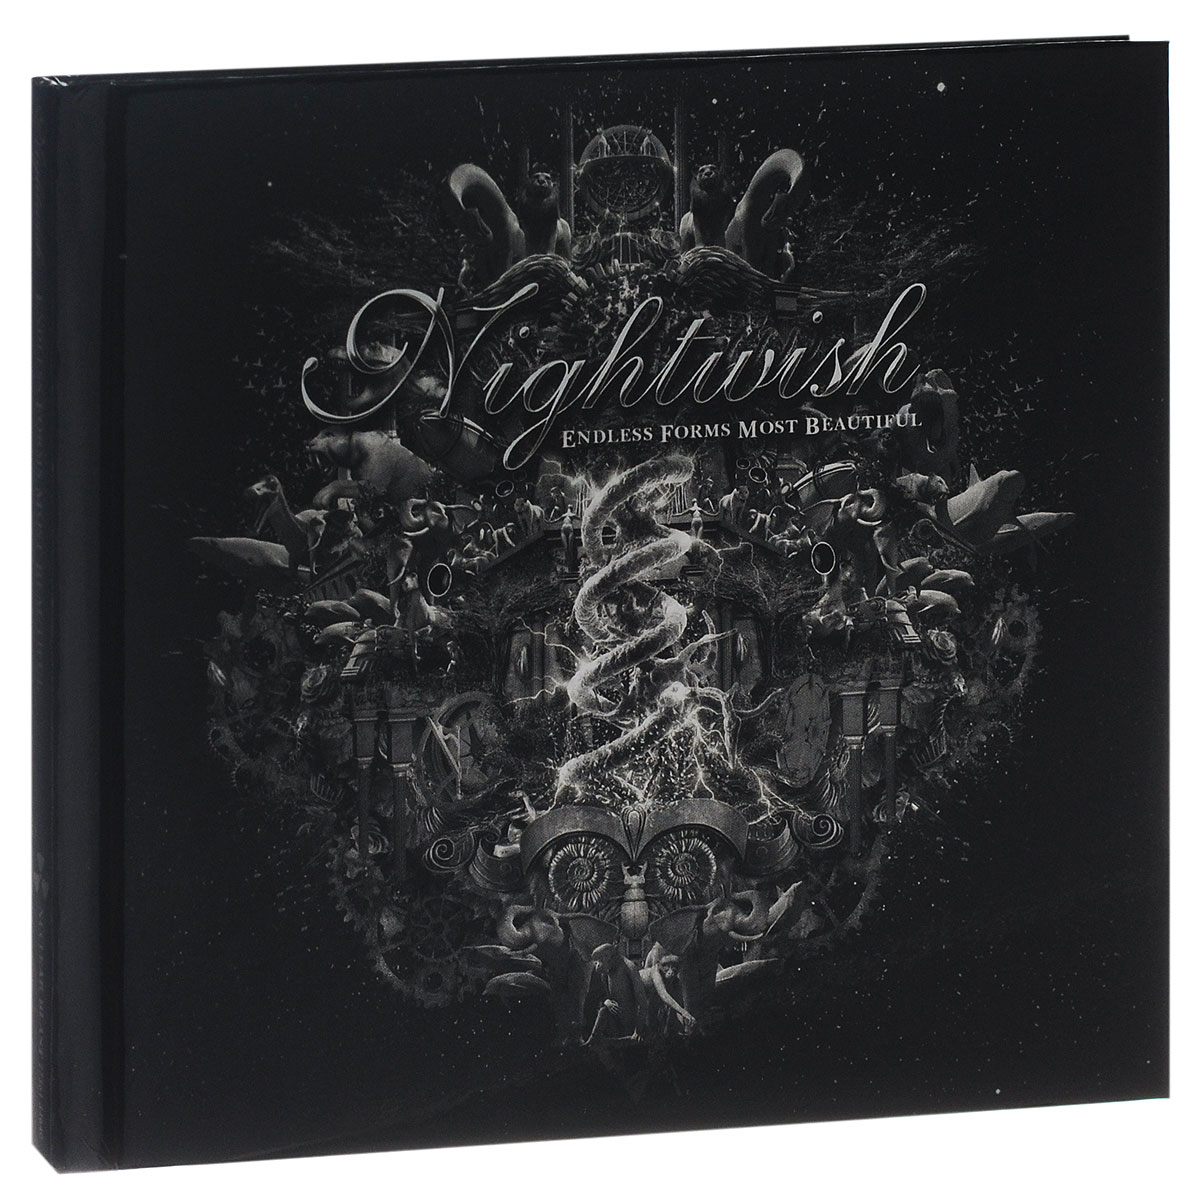 Nightwish. Endless Forms Most Beautiful. Limited Edition (2 CD)